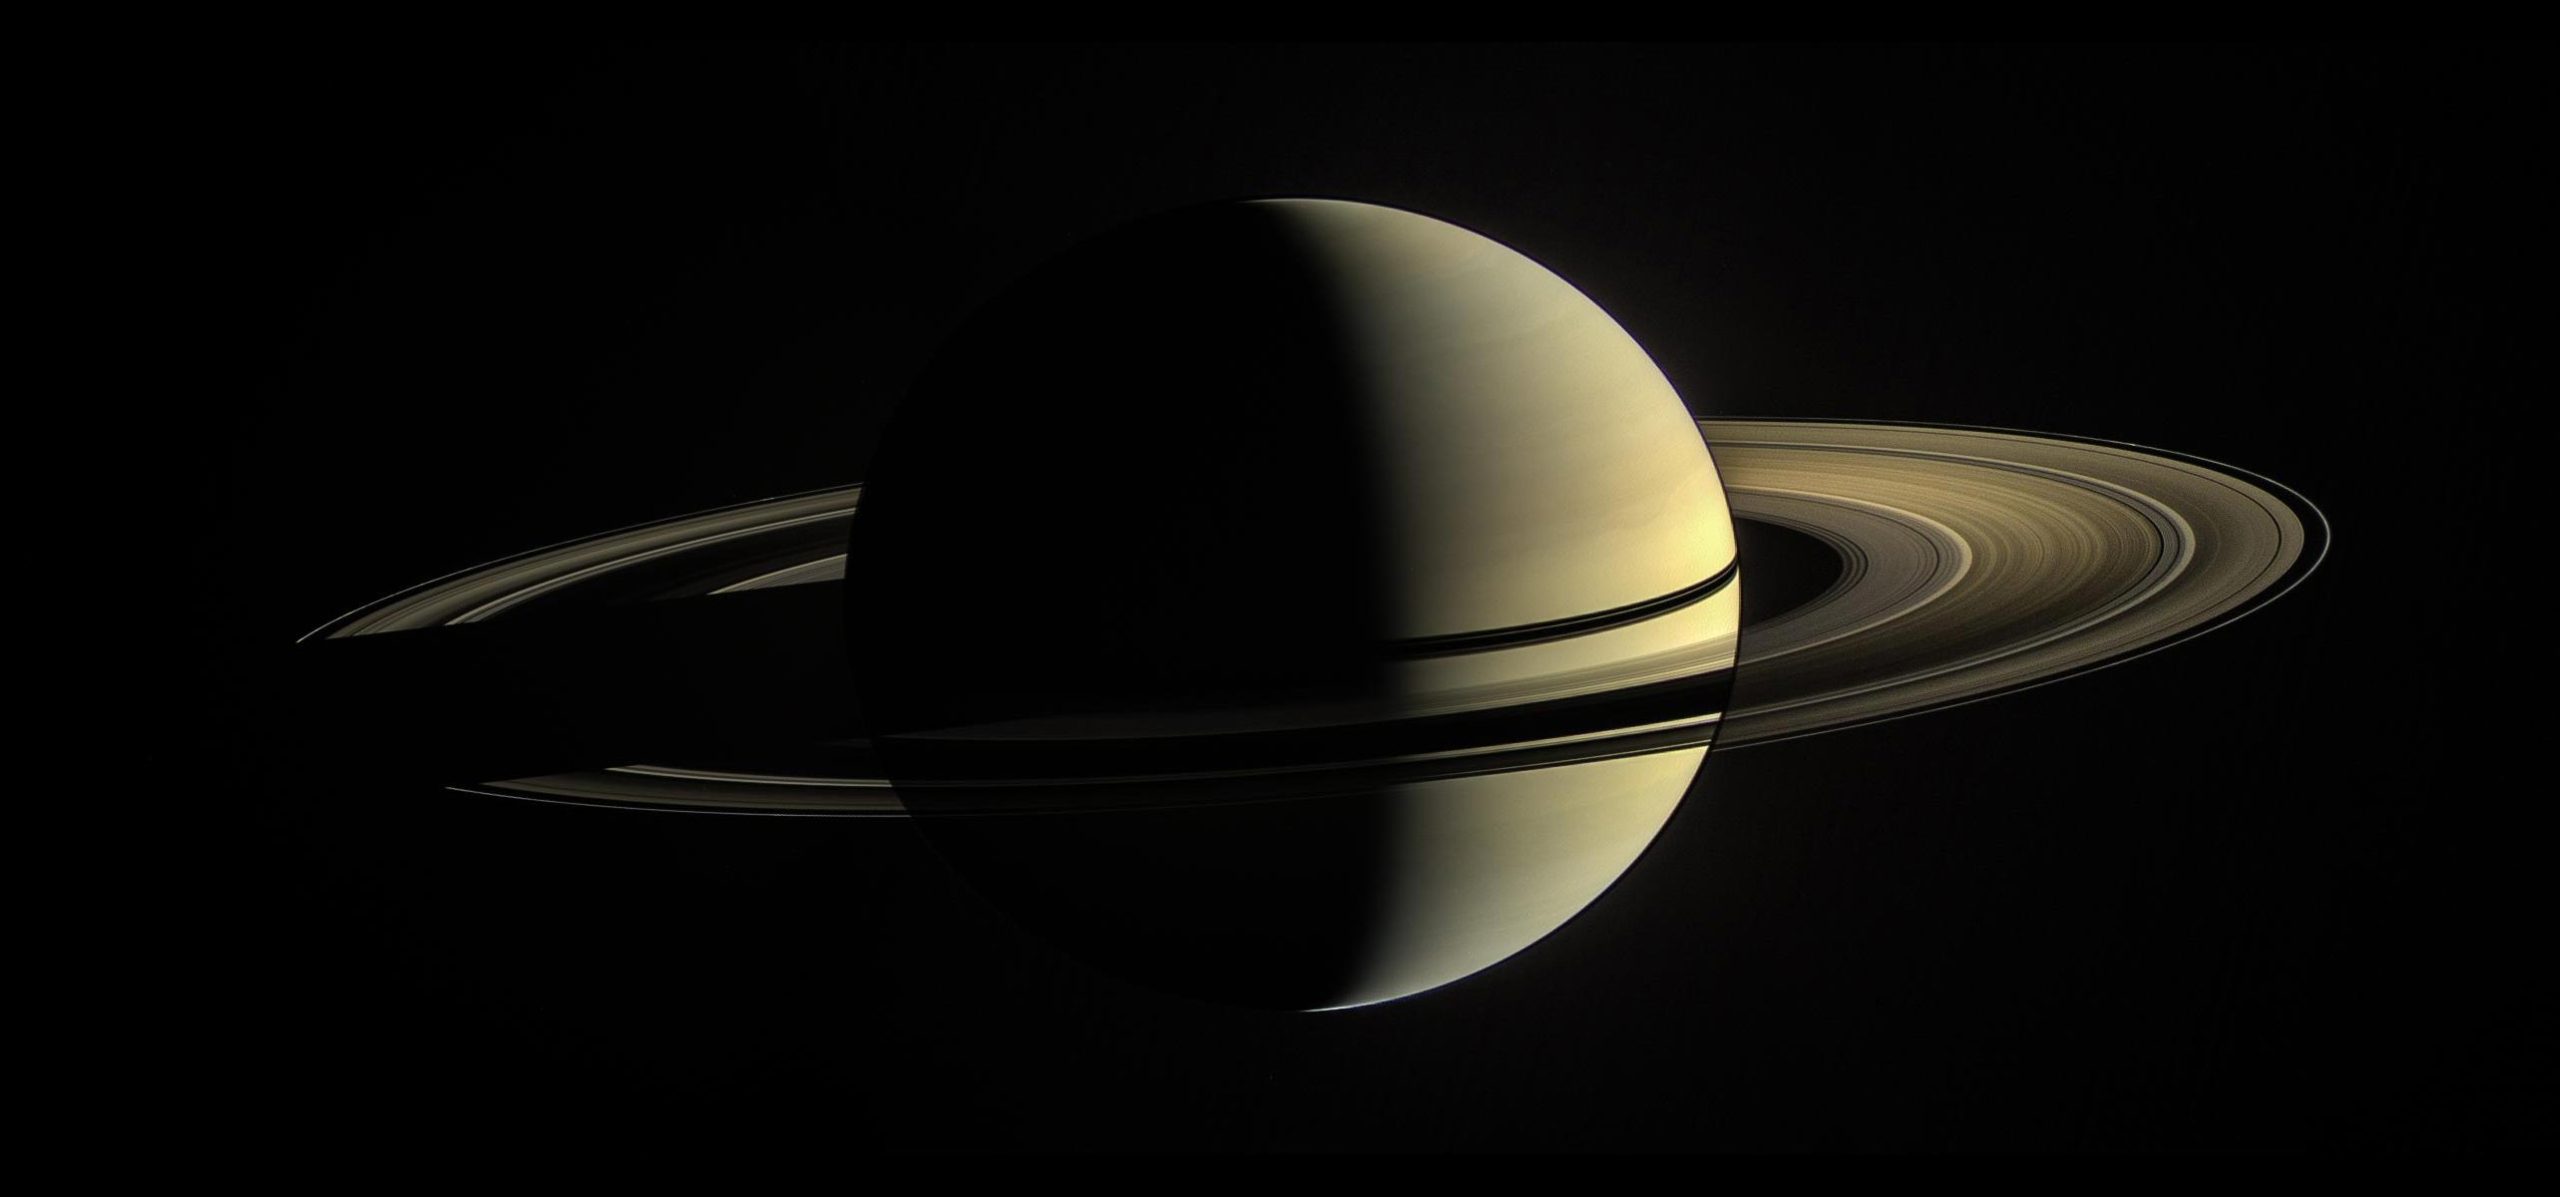 Saturn’s rings are small and can disappear quickly